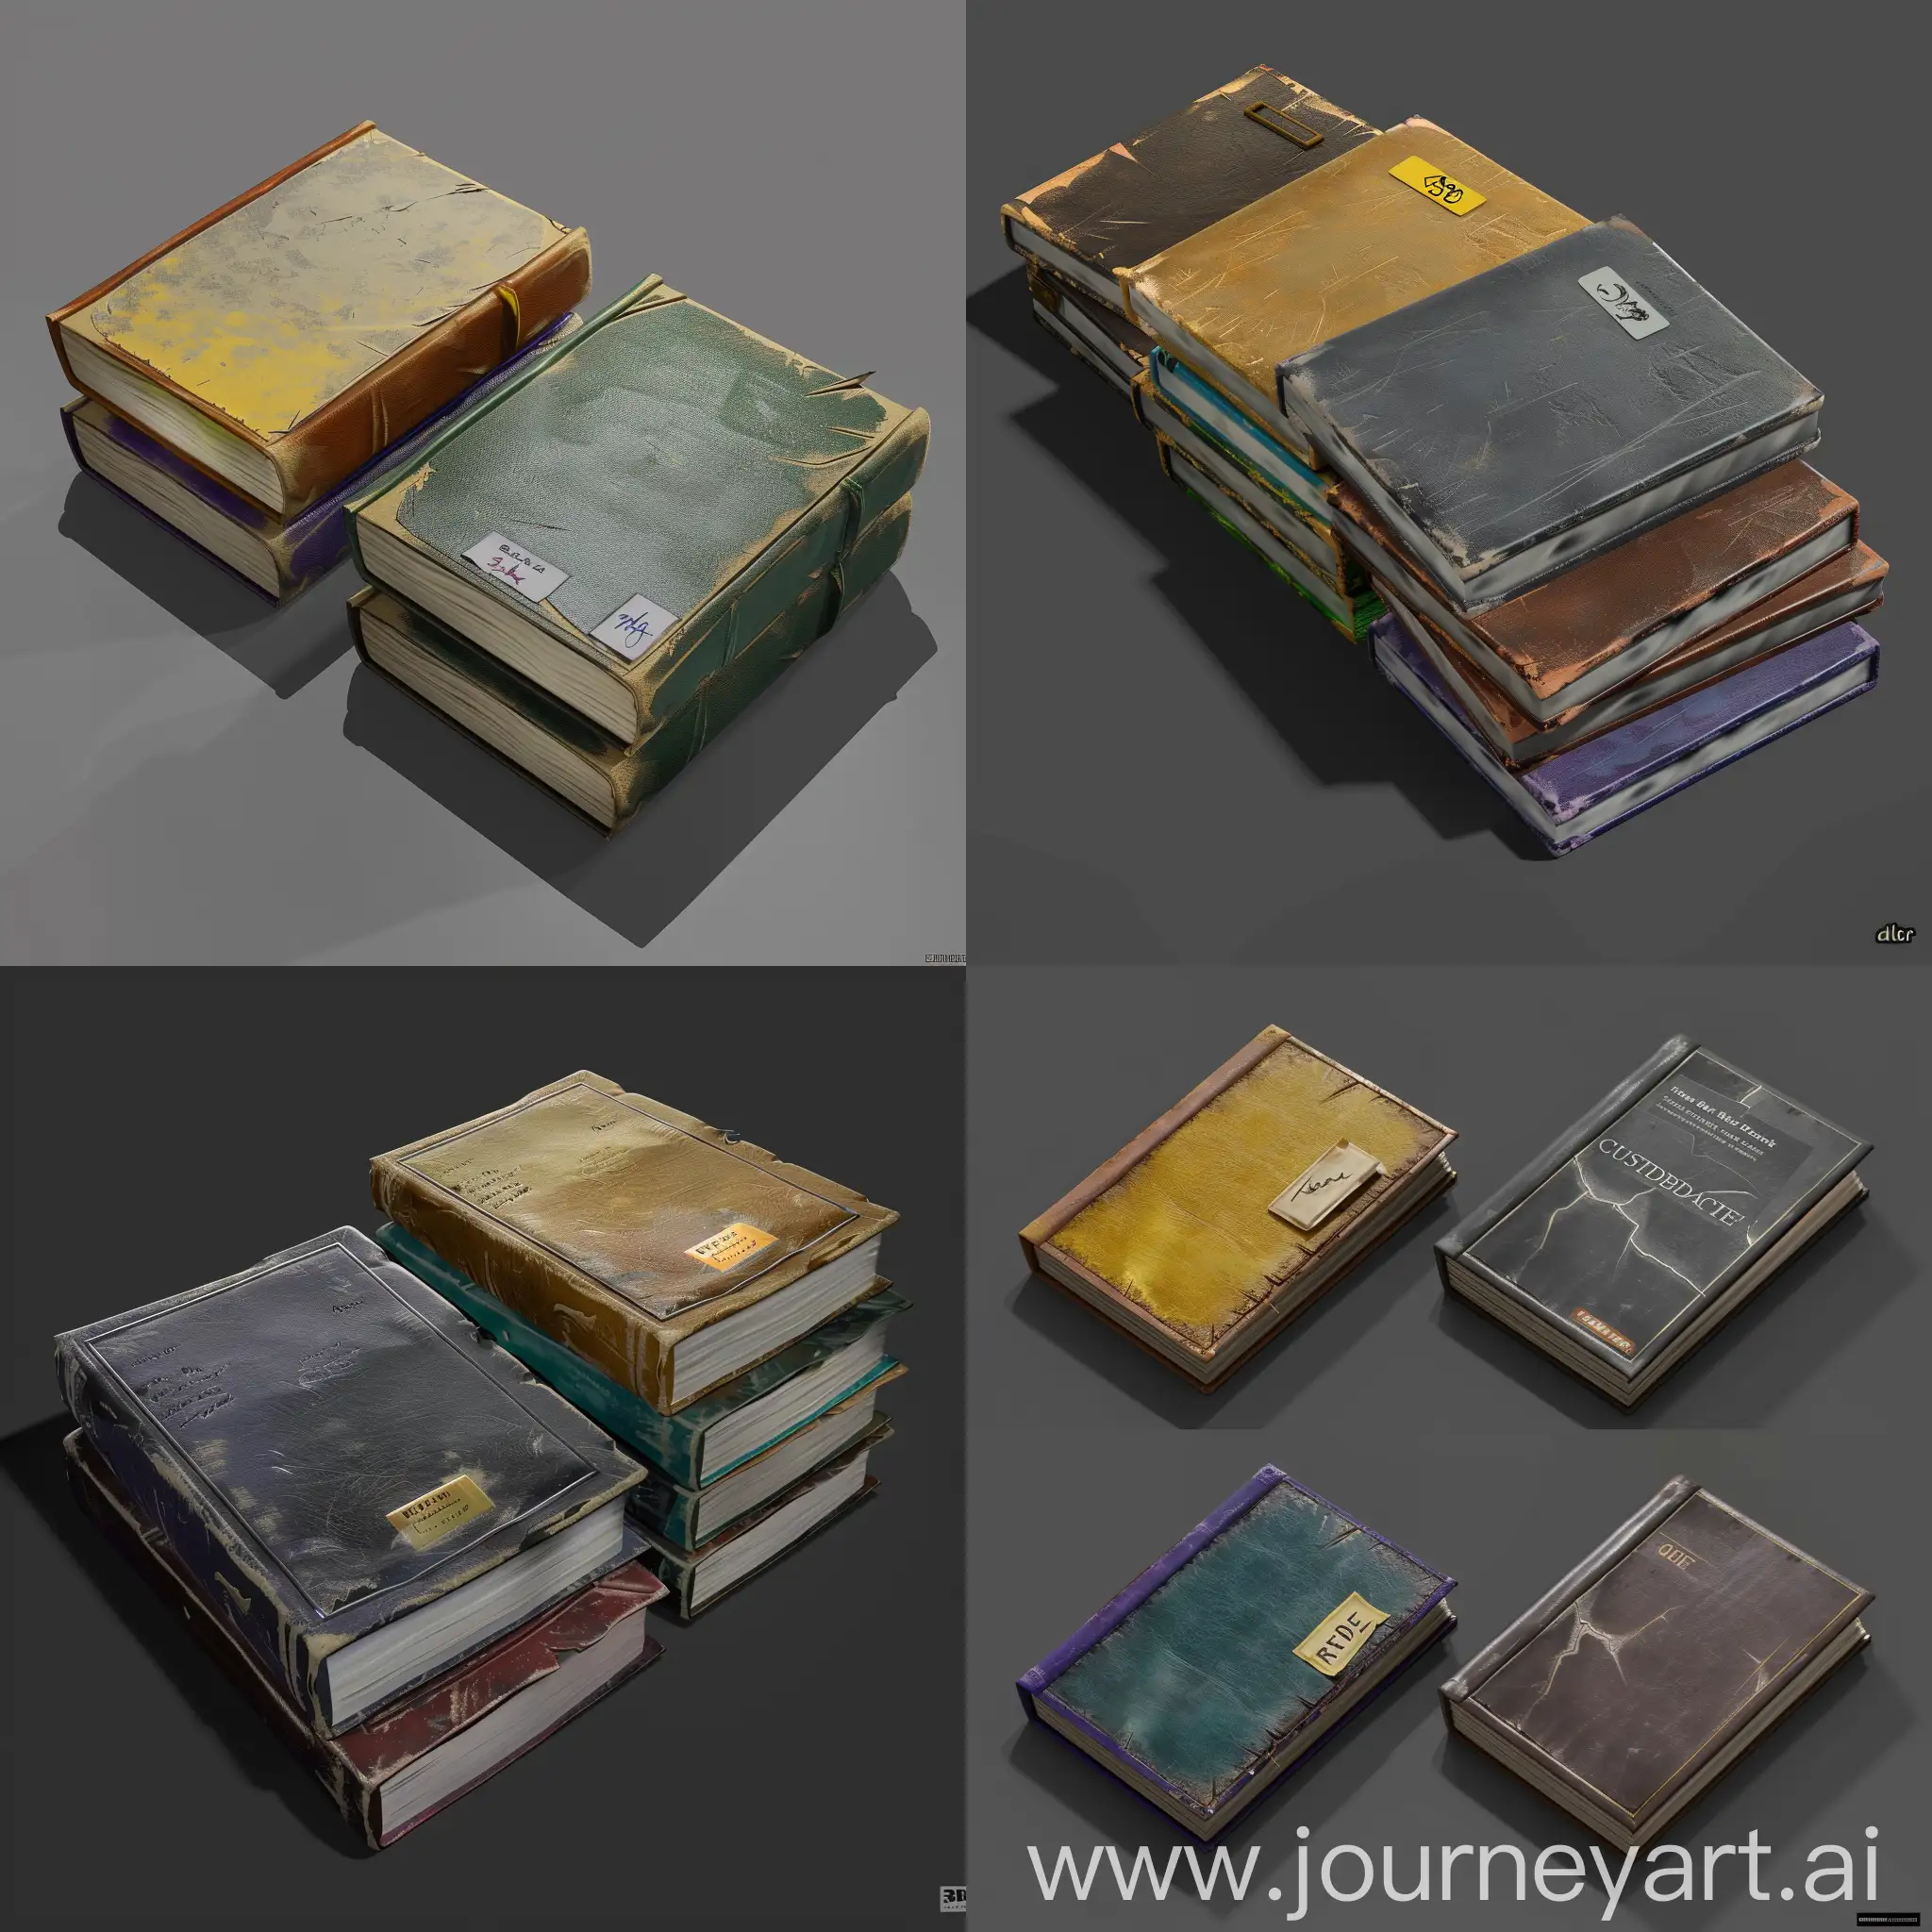 https://imgbly.com/ib/NhVu9noHmK.jpg realistic worn very thin books without text in style of realistic 3d blender game asset, leather cover, realistic style